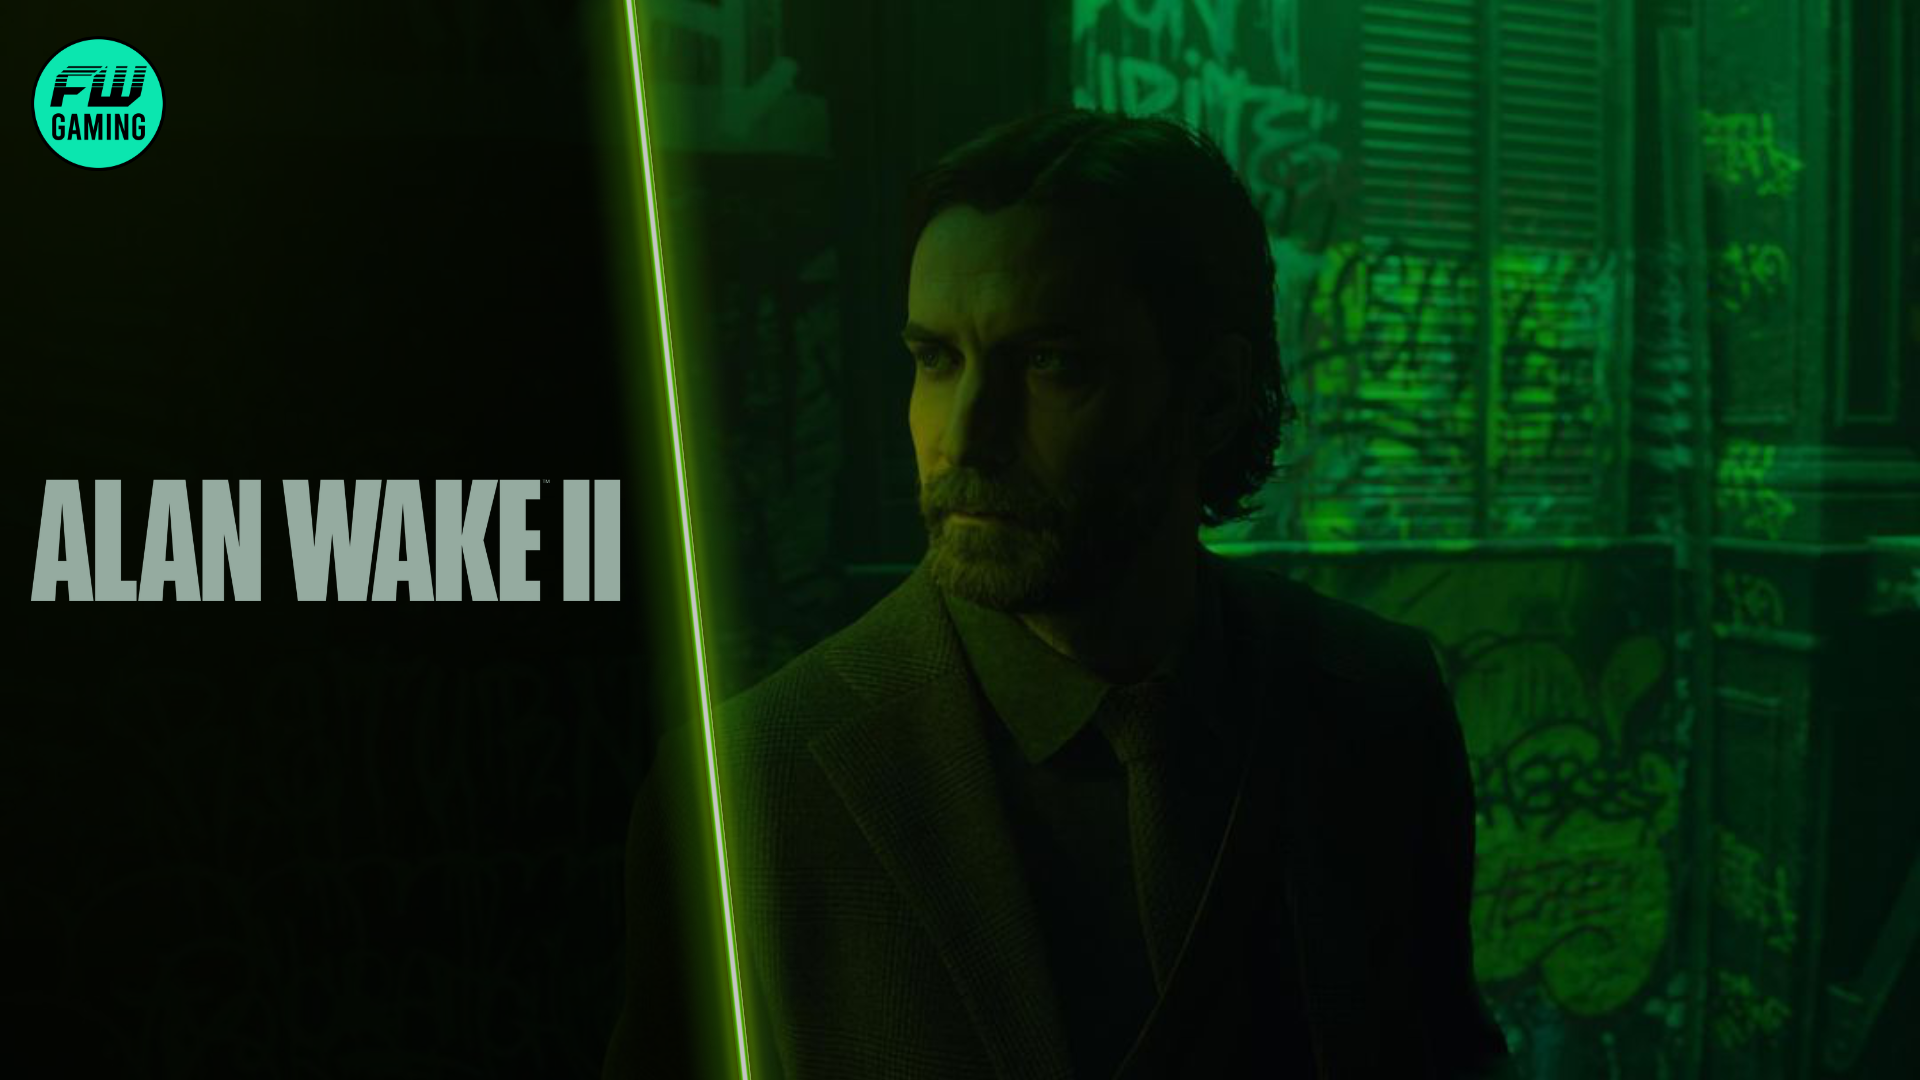 Amazing Alan Wake 2 Deal Chops Its Price by Nearly Half